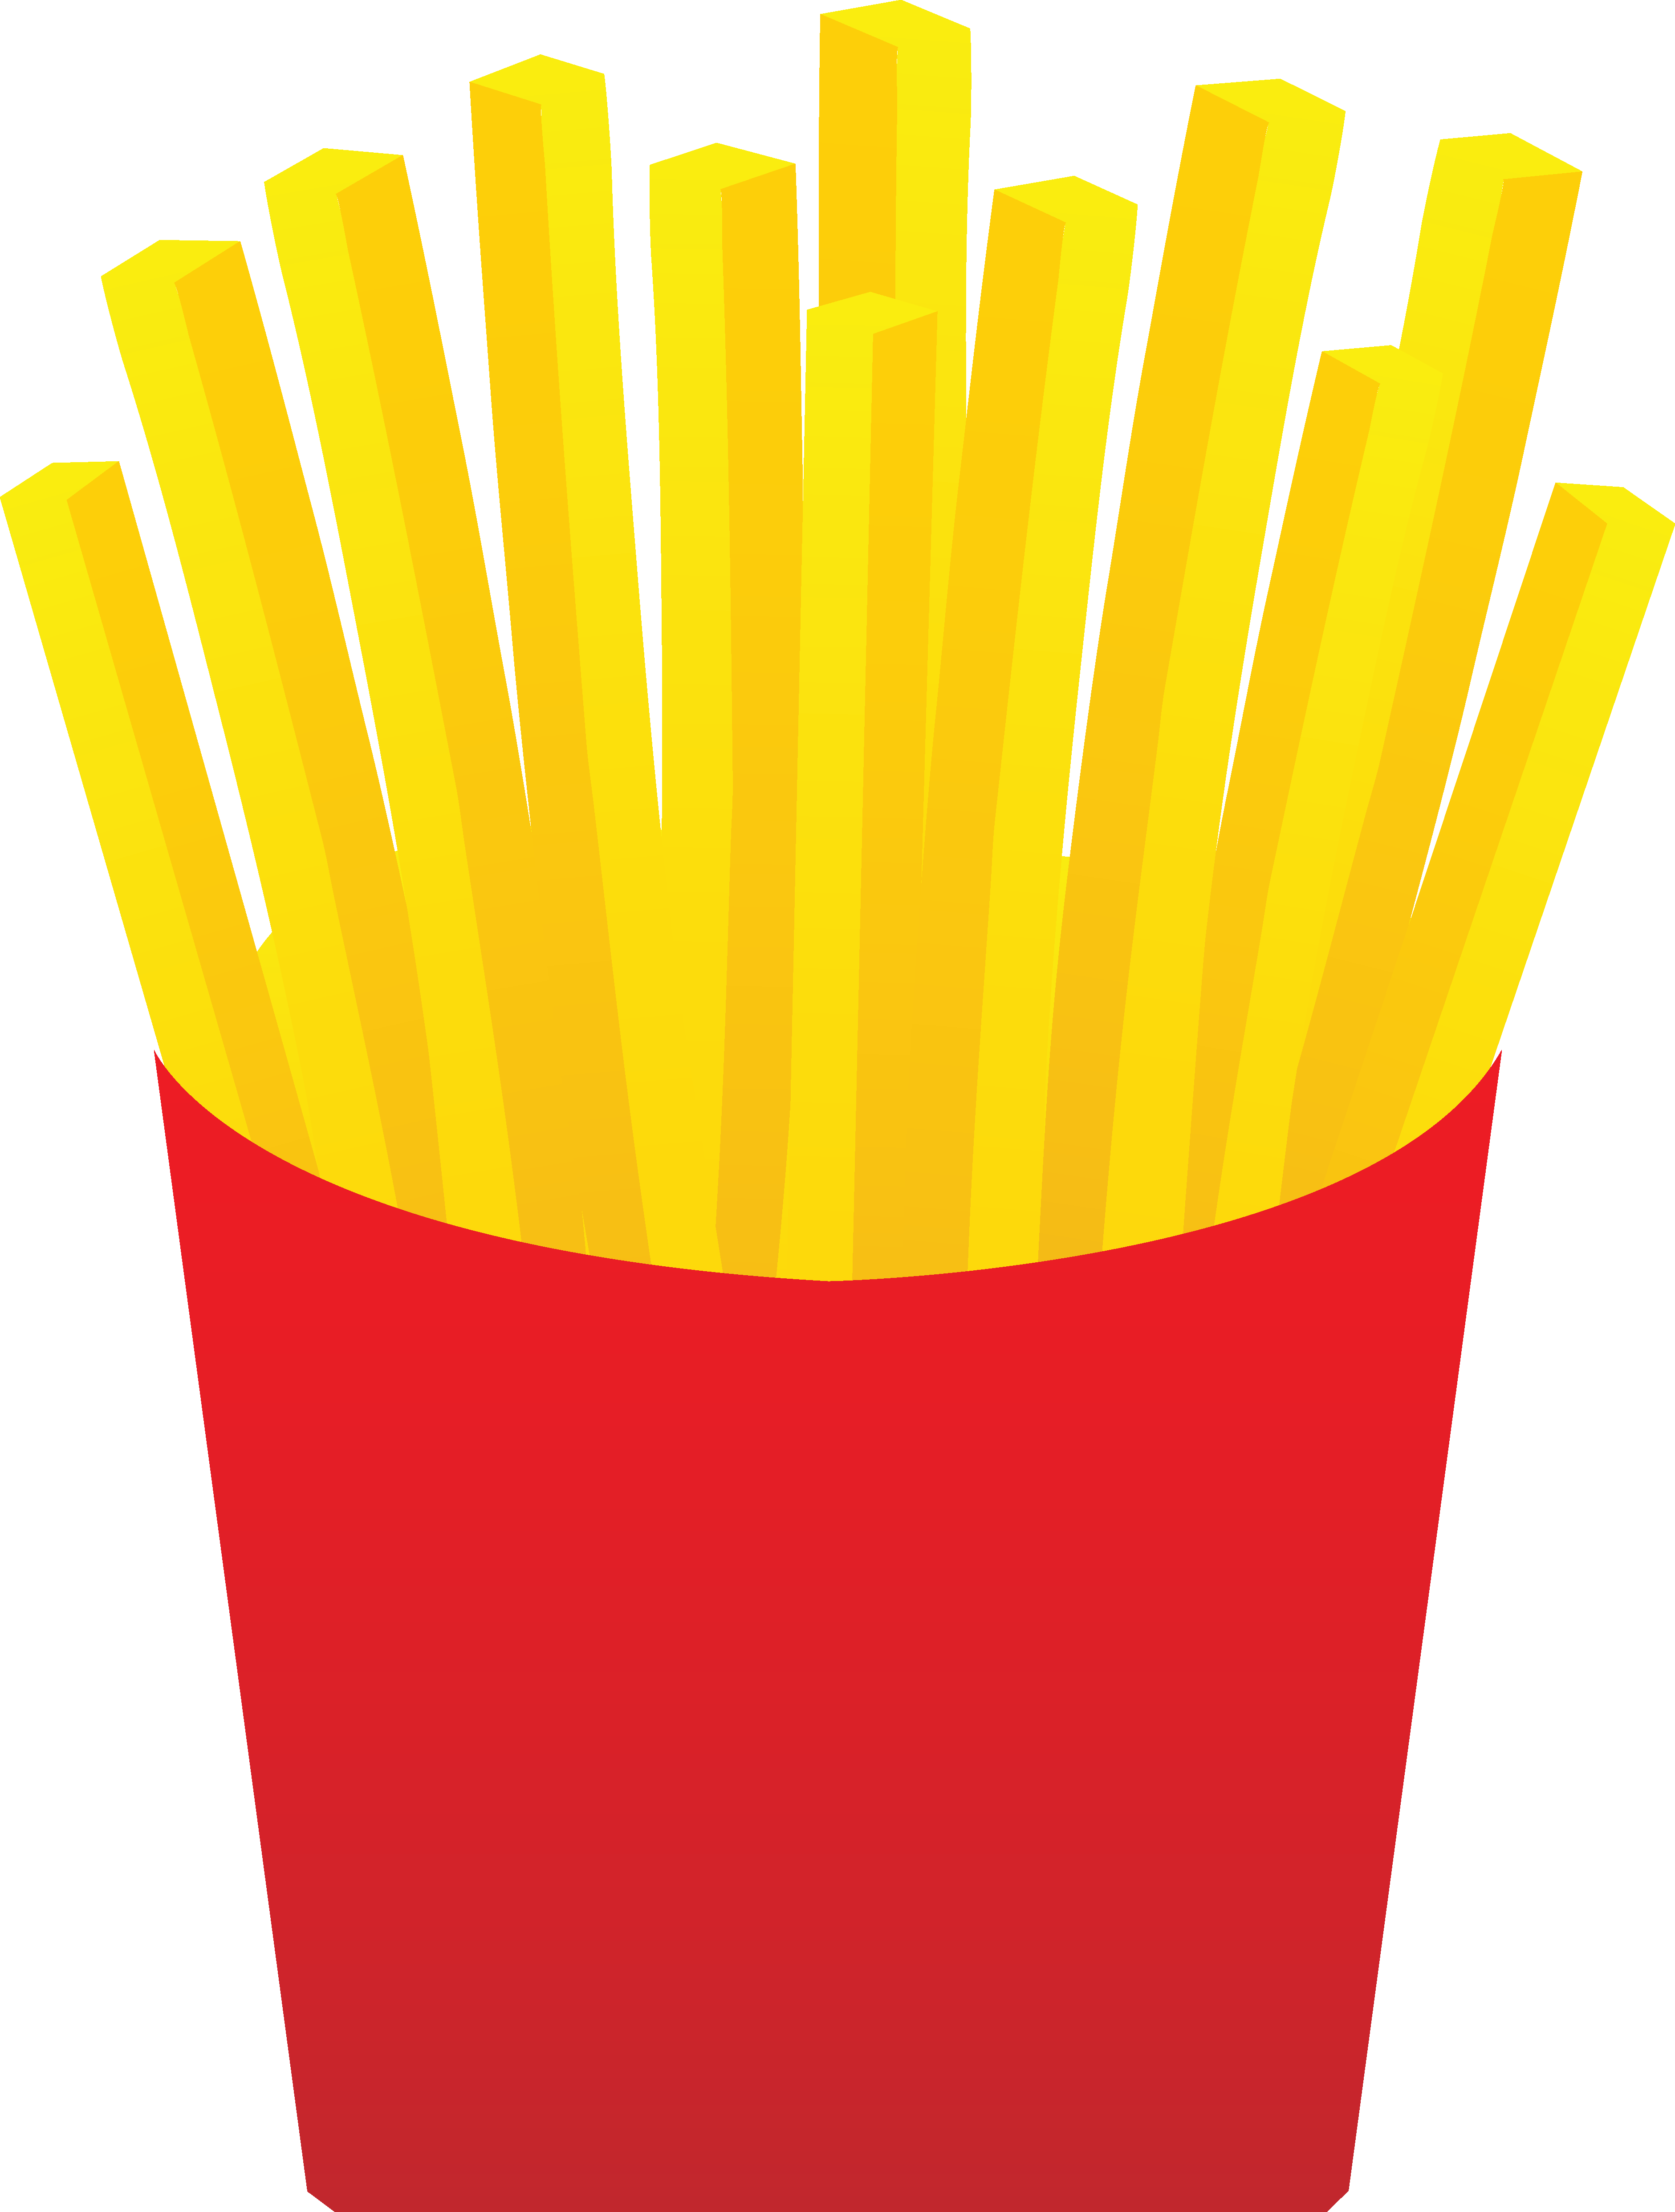 fast food images clip art - photo #41